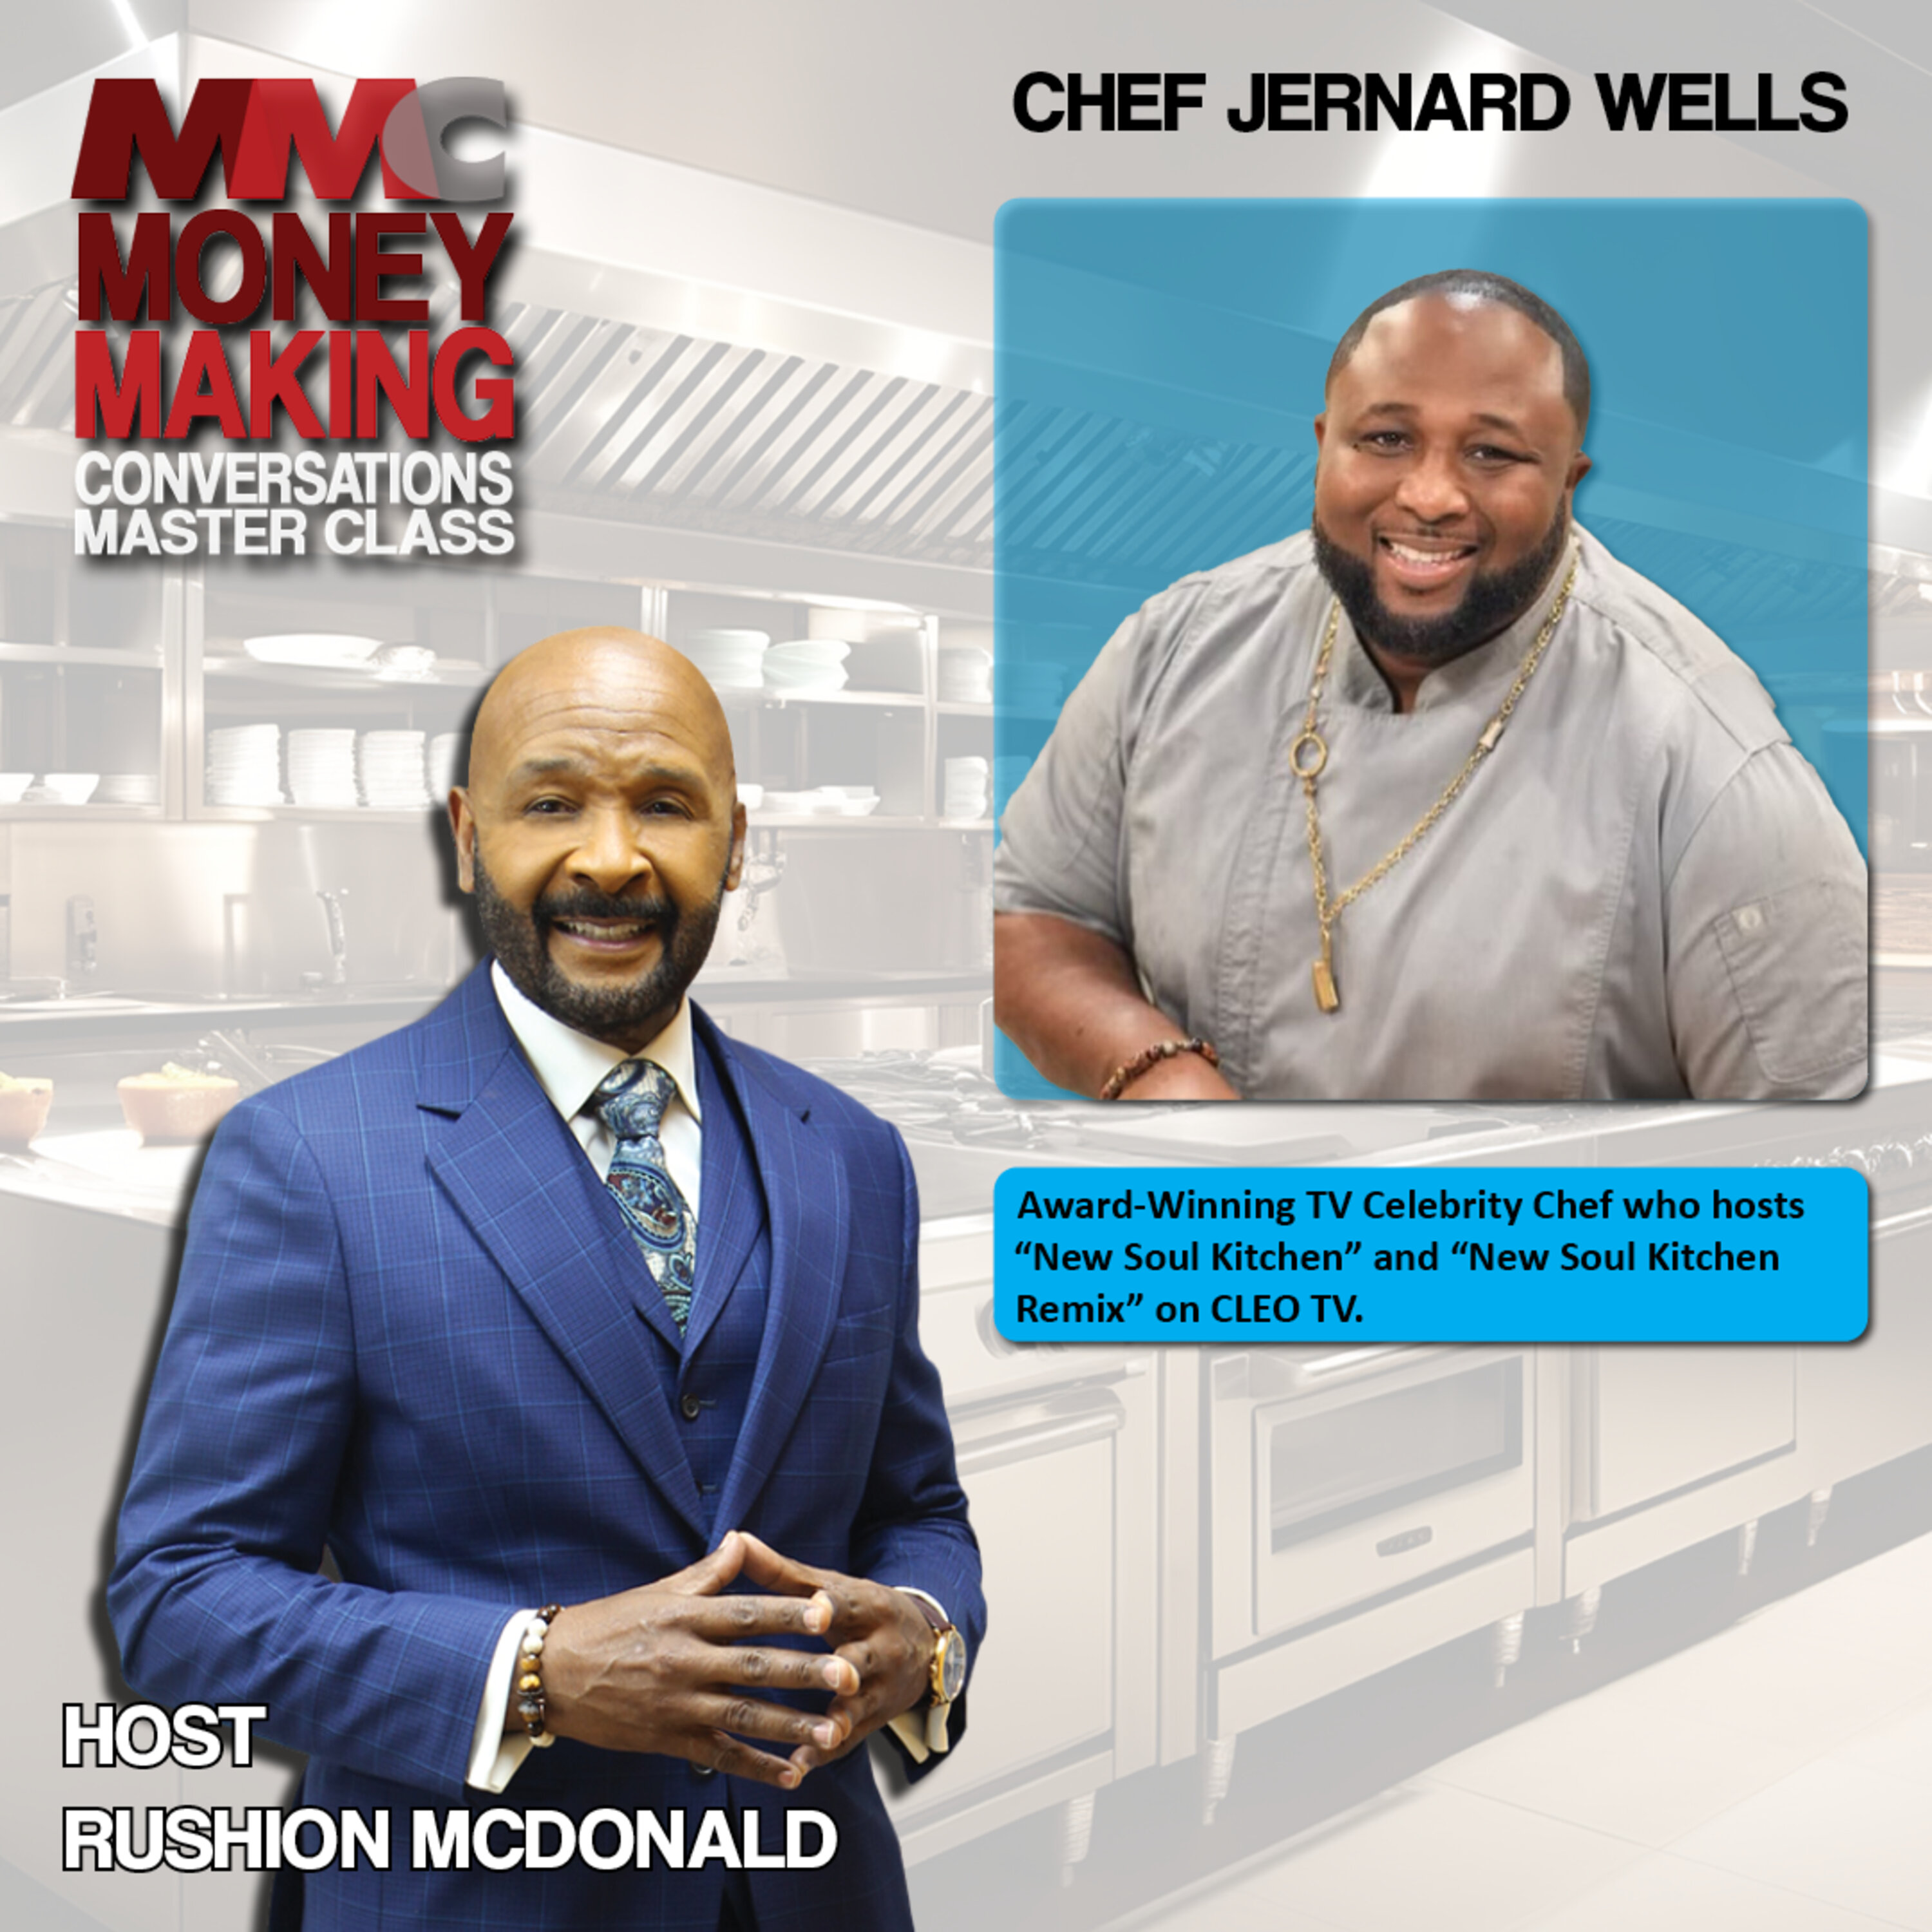 Host of ”New Soul Kitchen” and ”New Soul Kitchen Remix” on CLEO TV, Chef Jernard Wells.